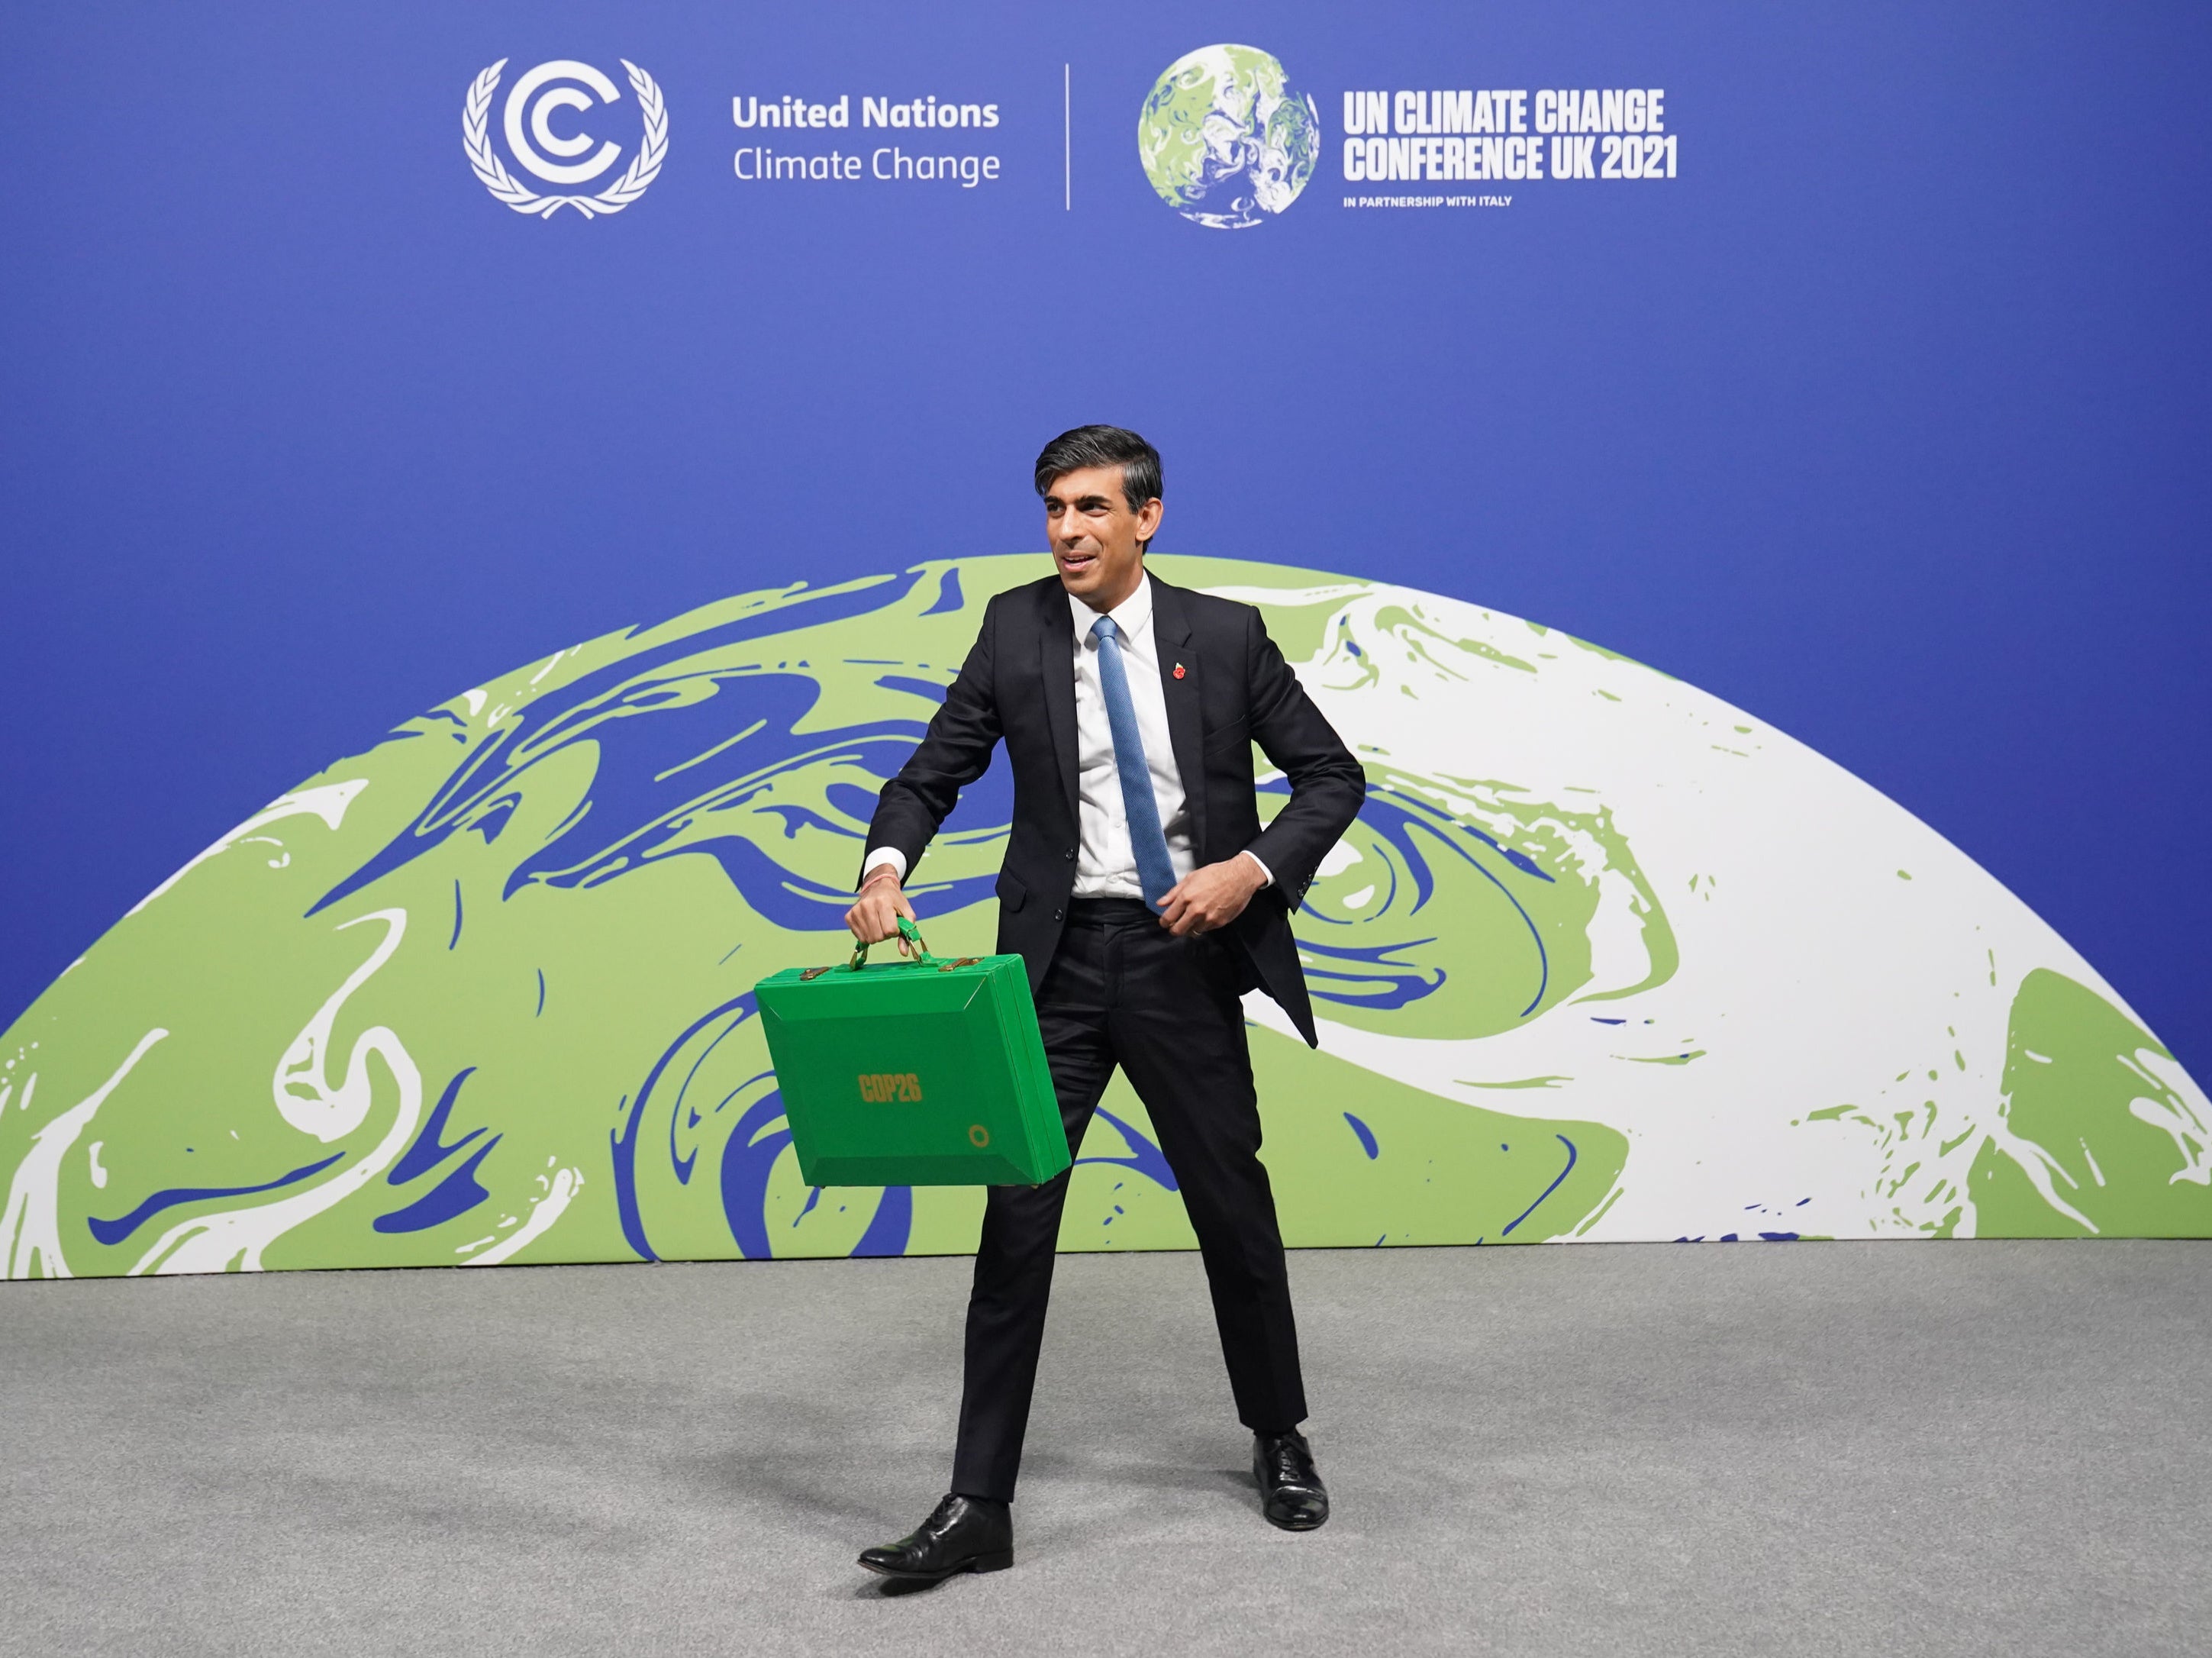 Rishi Sunak at Cop26 in Glasgow. He said he would not attend this year’s summit in Egypt, then changed his mind at the last minute